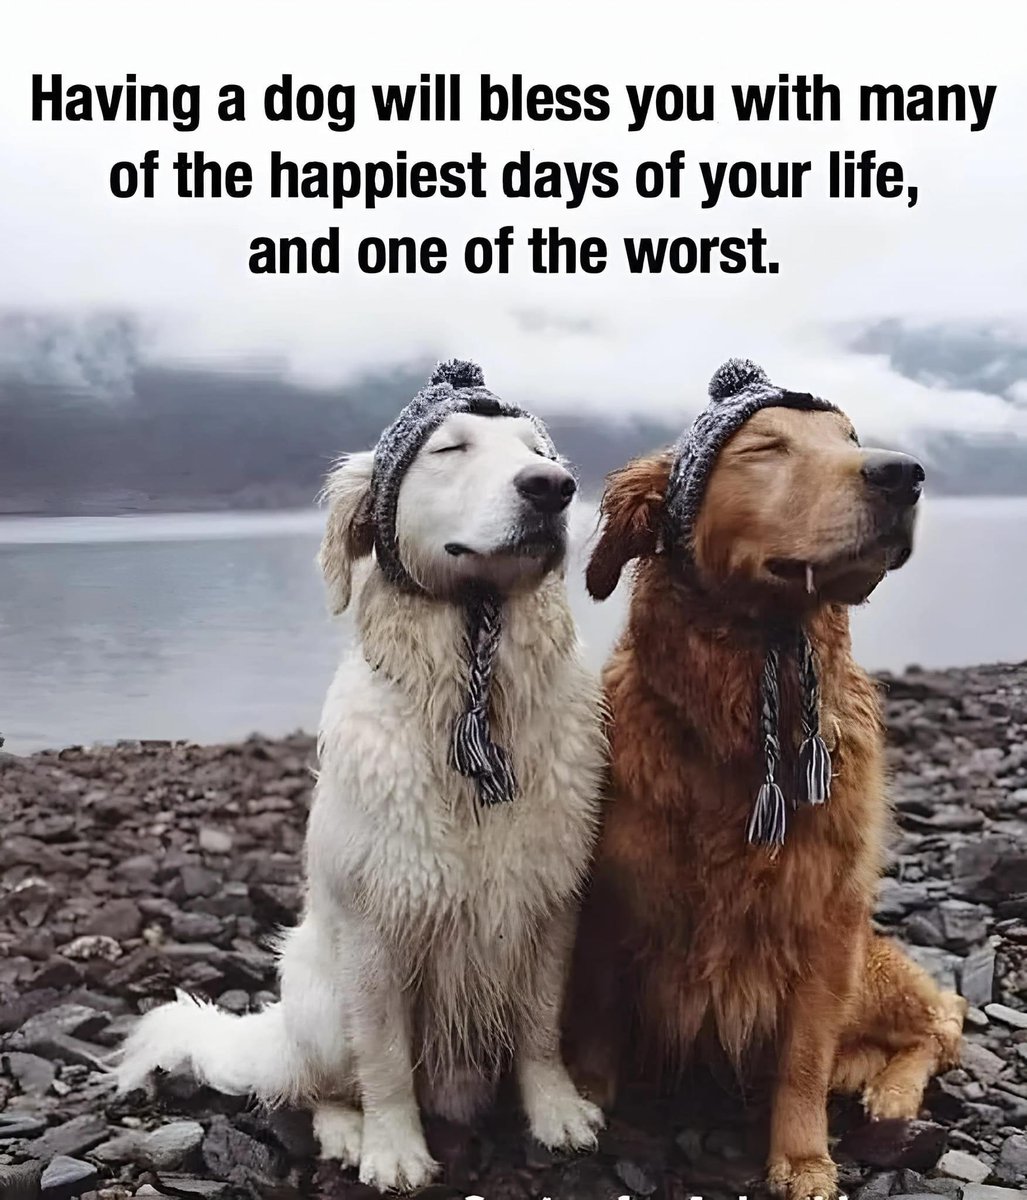 🐾💔😭💔🐾
TRUTH! 
I can not imagine getting through life’s toughest times without dogs. The hardest part of loving your dog is the day you must say good bye.
#GoodDogsDontLiveLongEnough
#Dogs #IloveMyDog